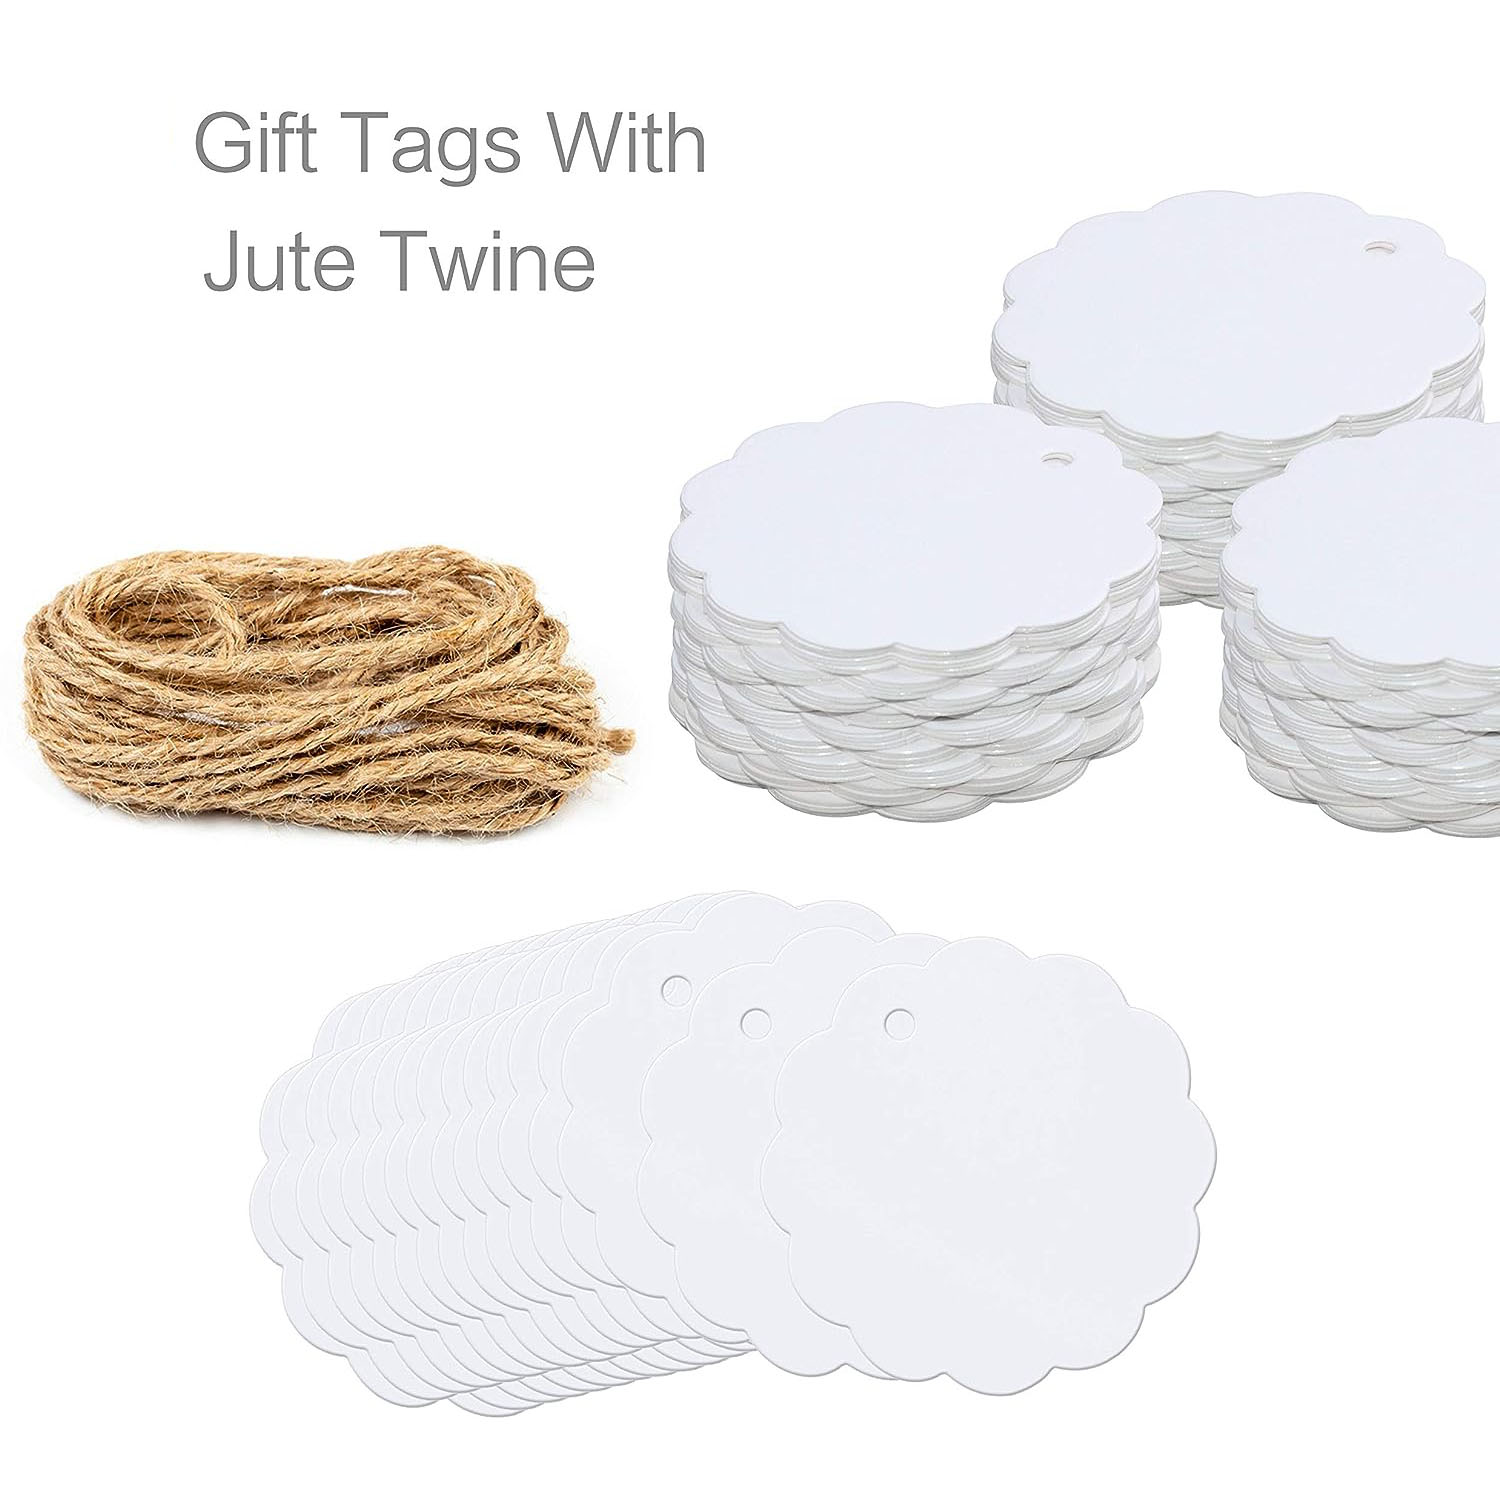 Thank You Tag, Paper Gift Tag Round Gift Tags with 100 Feet Natural Jute Twine Perfect for Crafts & Price Tags Labels,Wedding Parties (Brown)